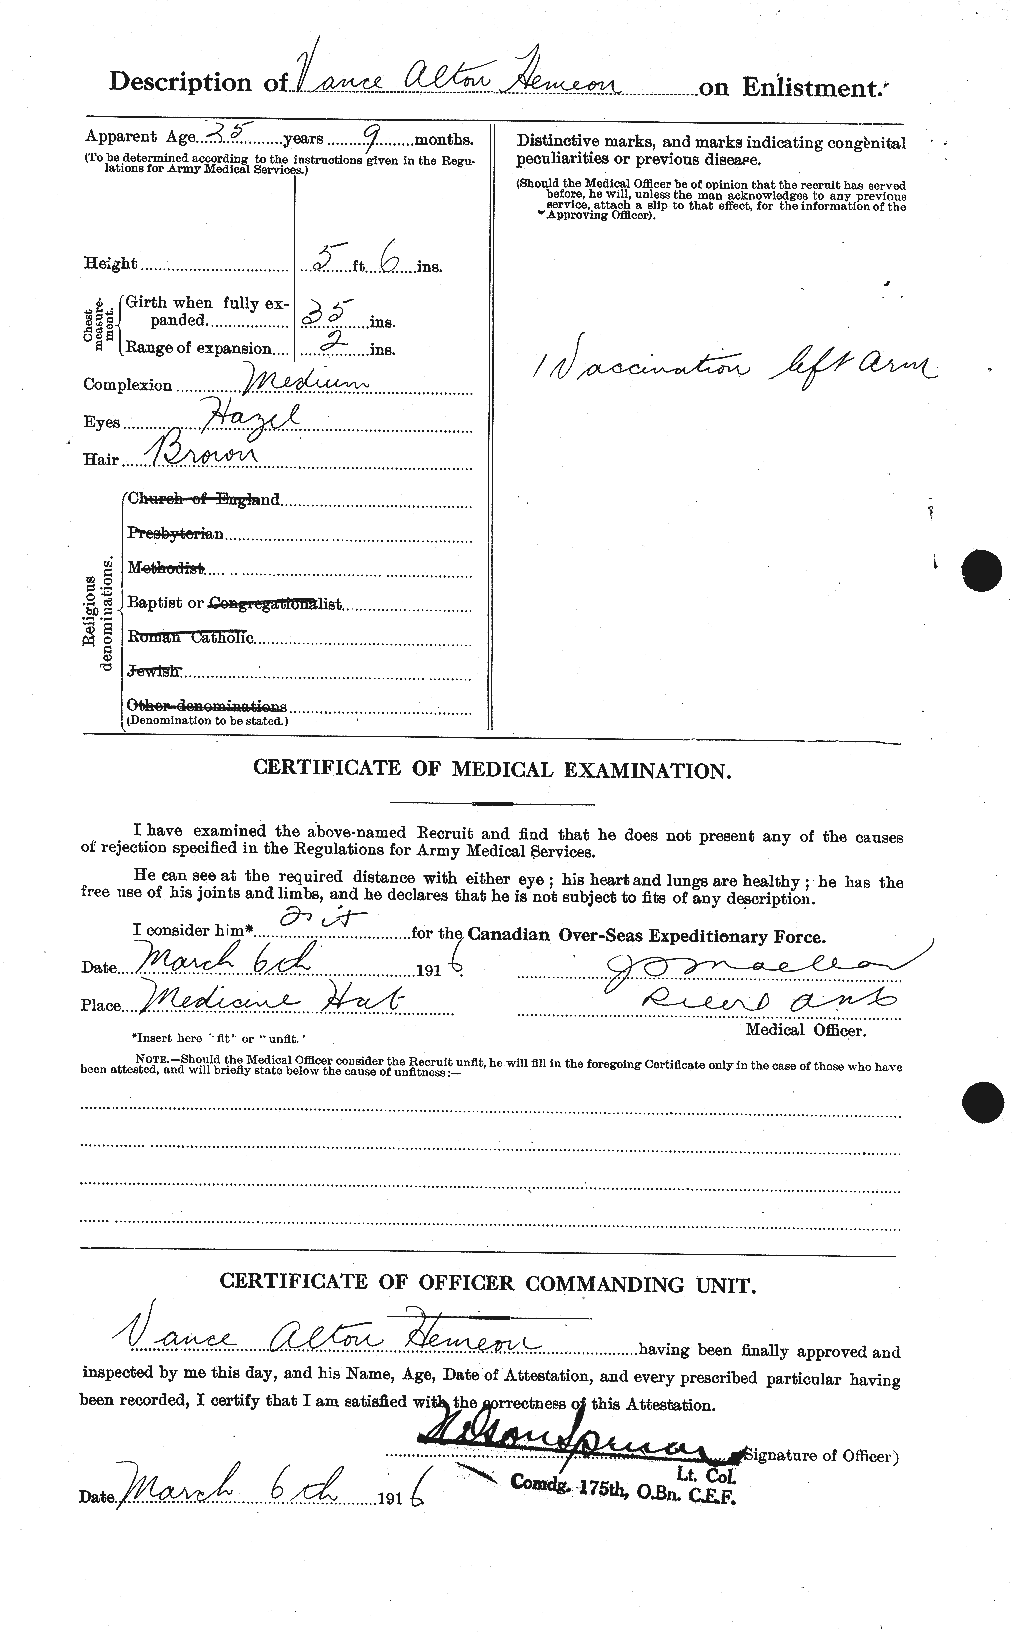 Personnel Records of the First World War - CEF 385169b